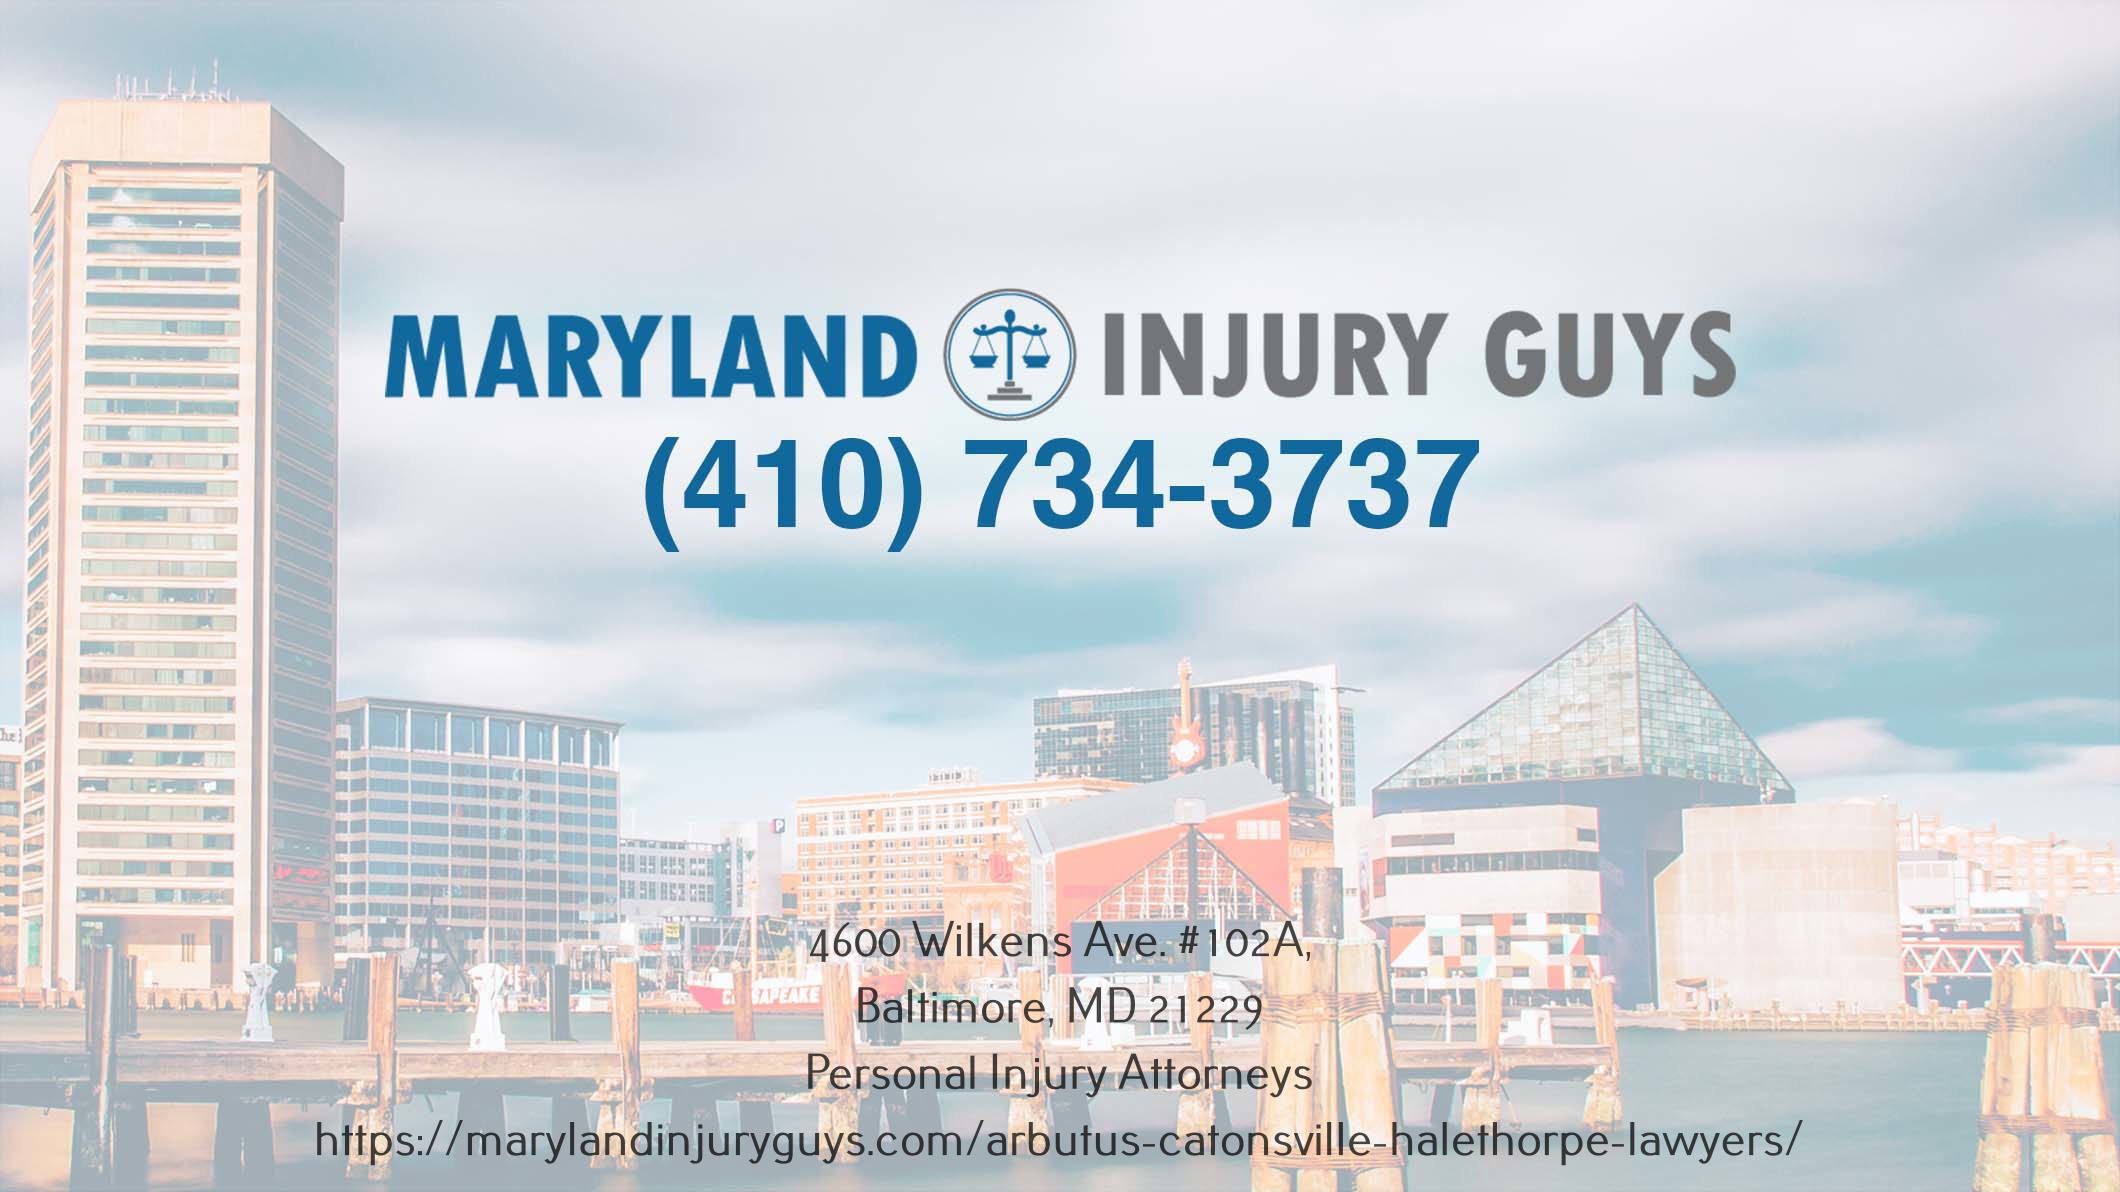 Catonsville-Arbutus-And-Halethorpe-Maryland-Personal-Injury-Law-Firm.jpg